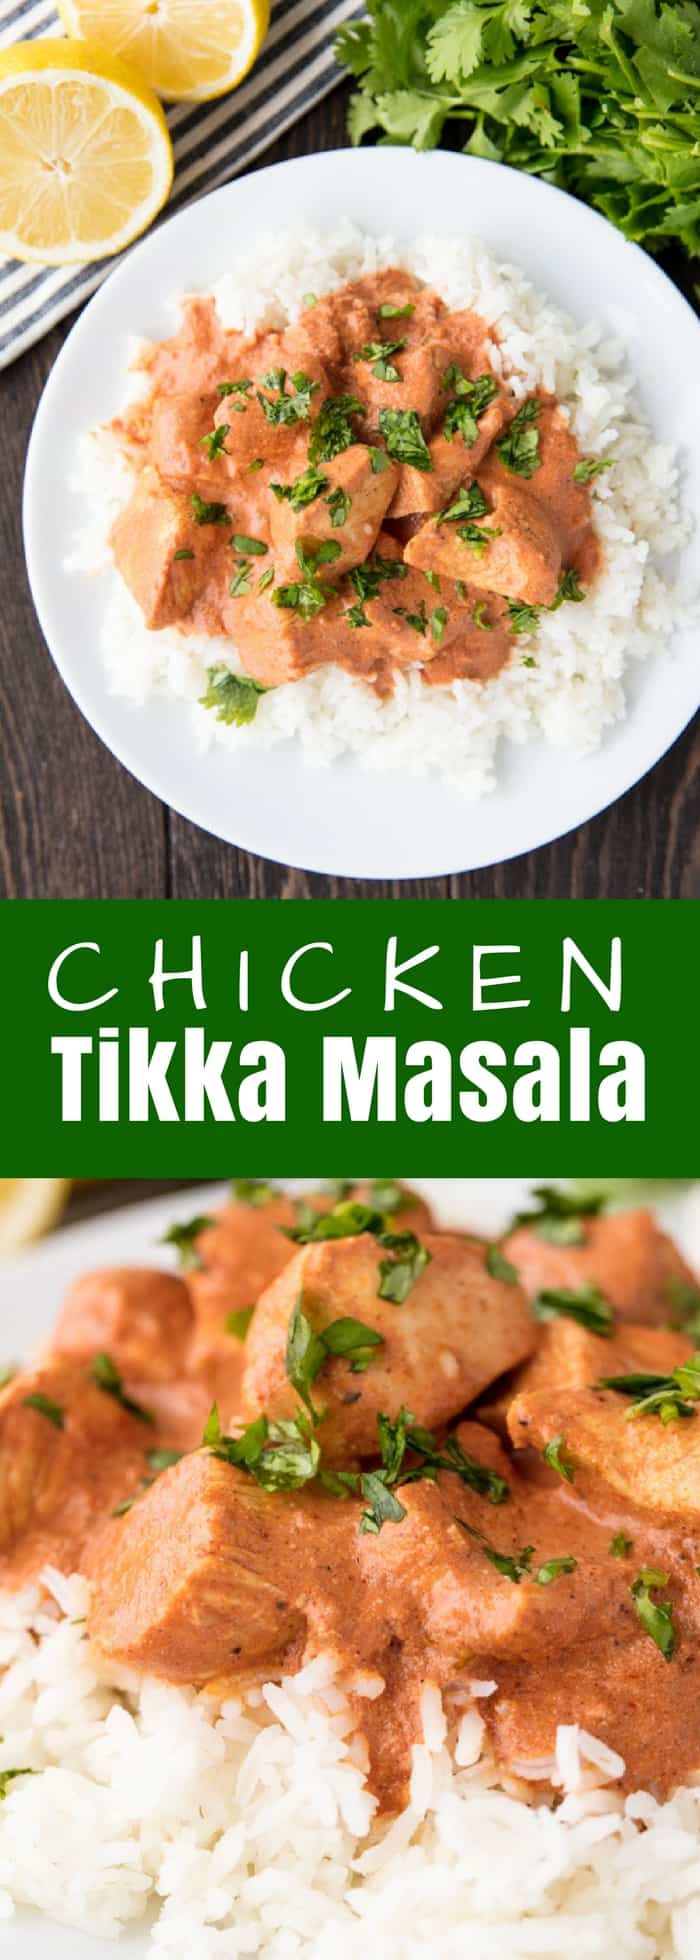 This Chicken Tikka Masala recipe is absolute perfection with a spiced yogurt marinade and a quick and easy masala sauce that is full of Indian flavors. 